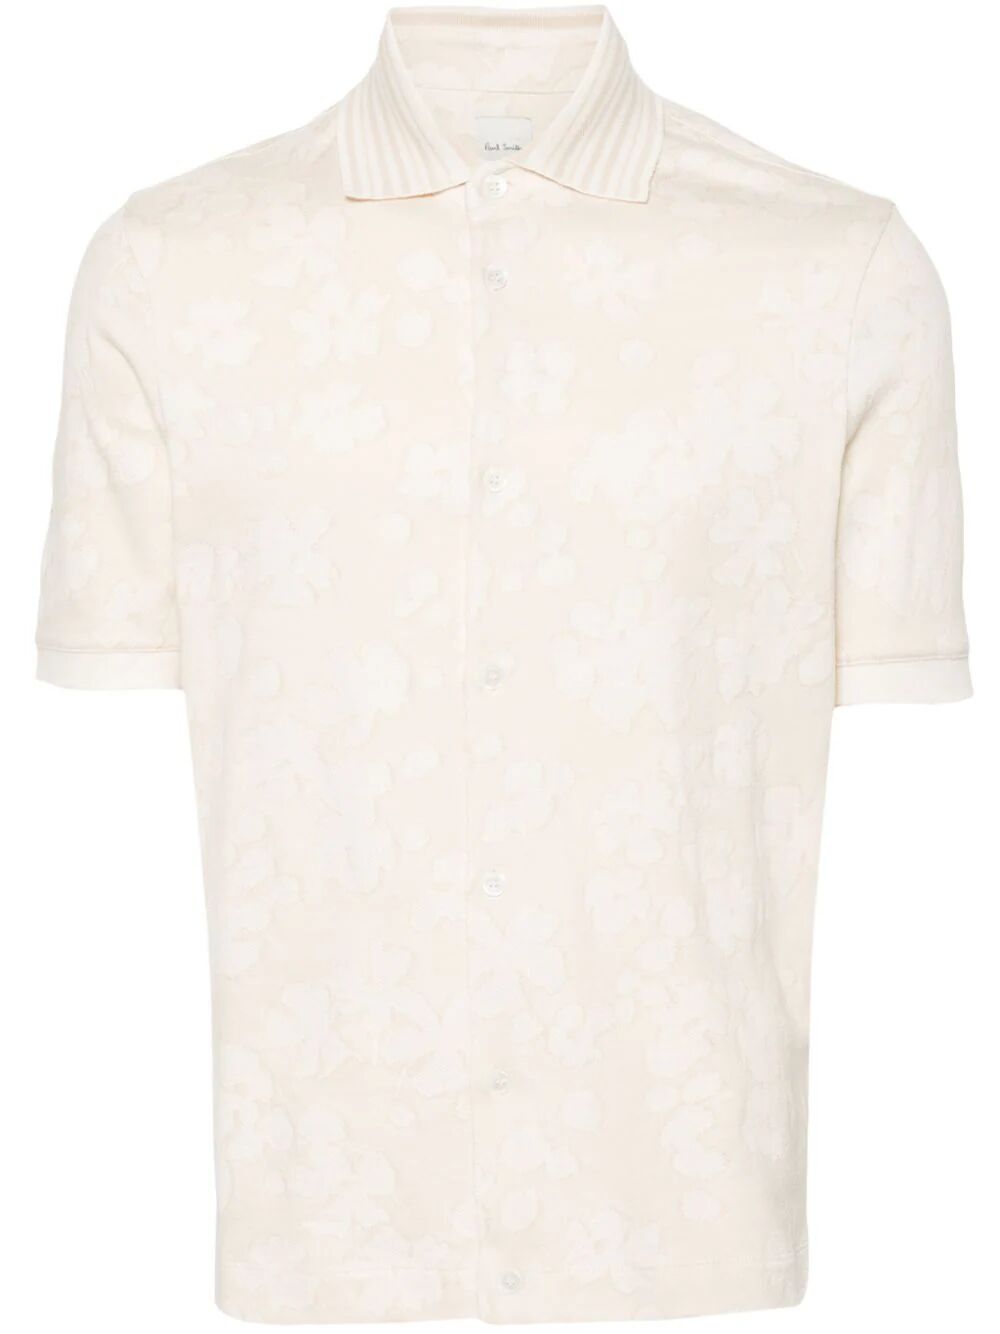 Shop Paul Smith Mens Floral Jacquard Shirt In White